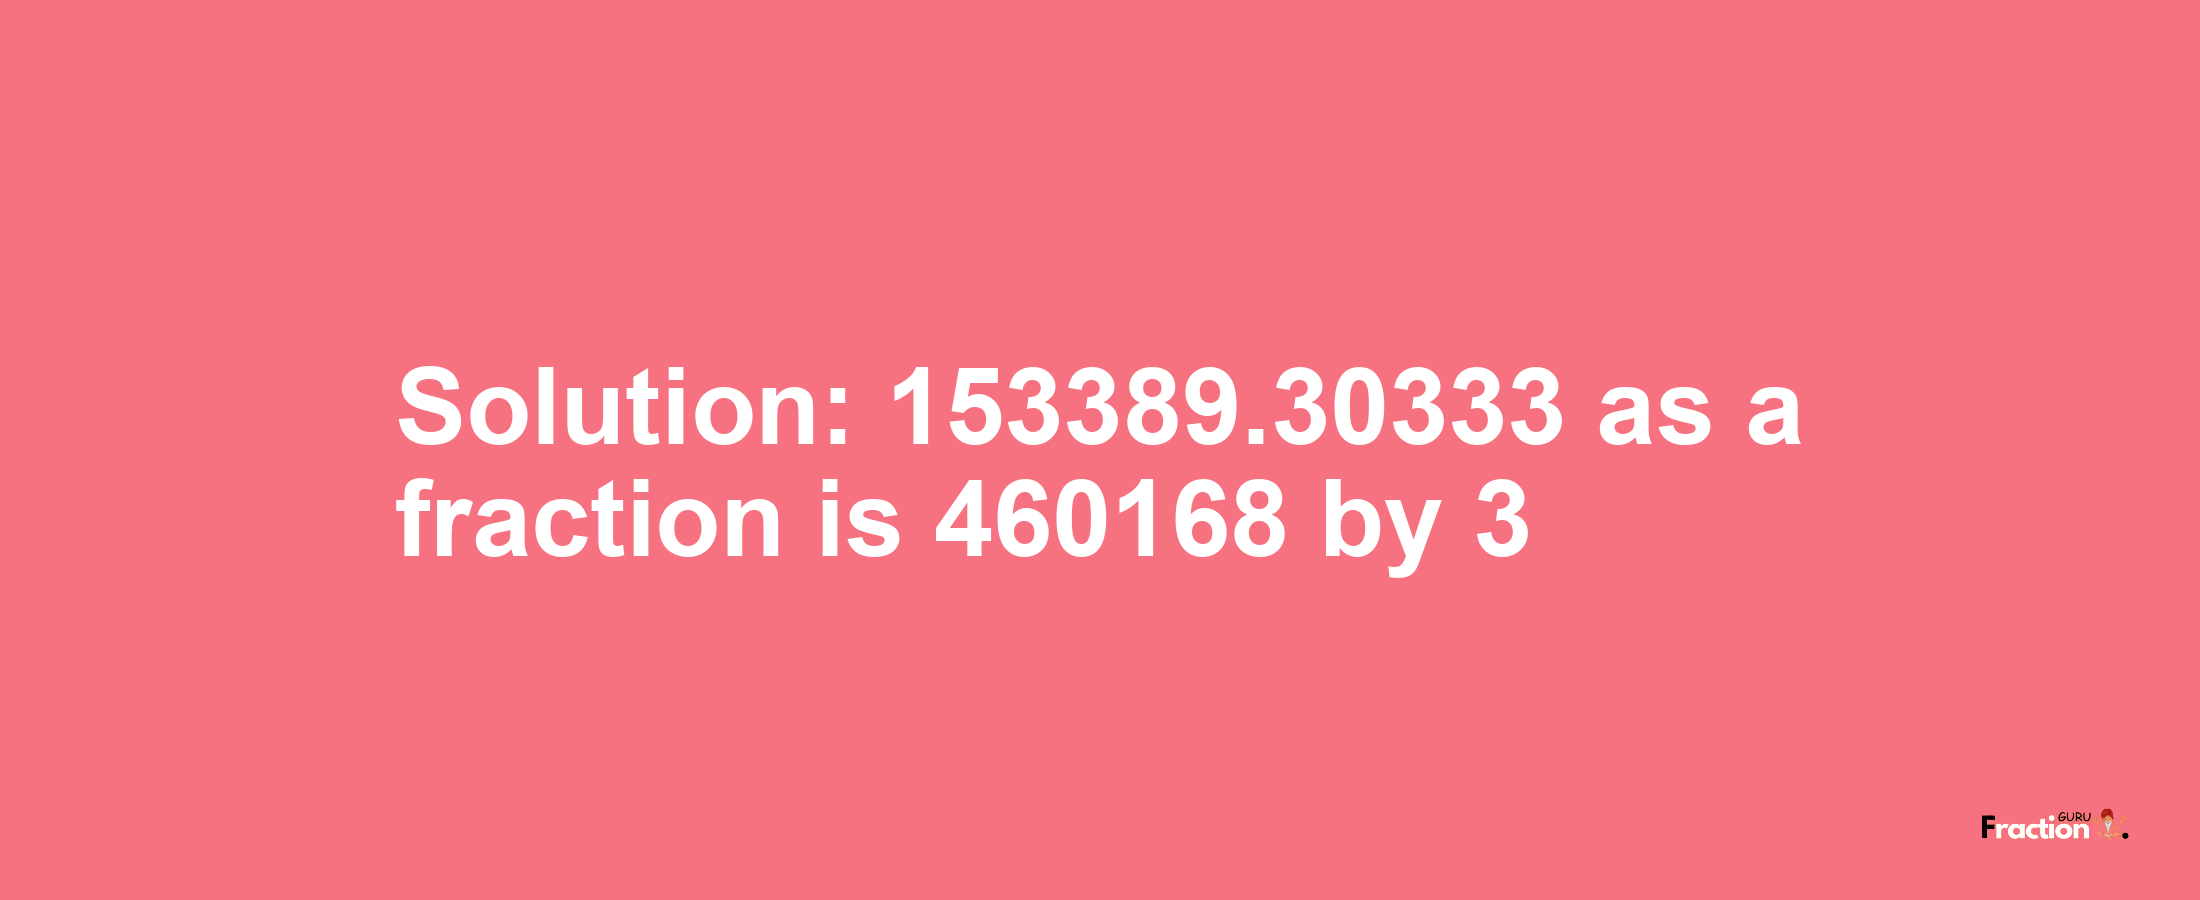 Solution:153389.30333 as a fraction is 460168/3